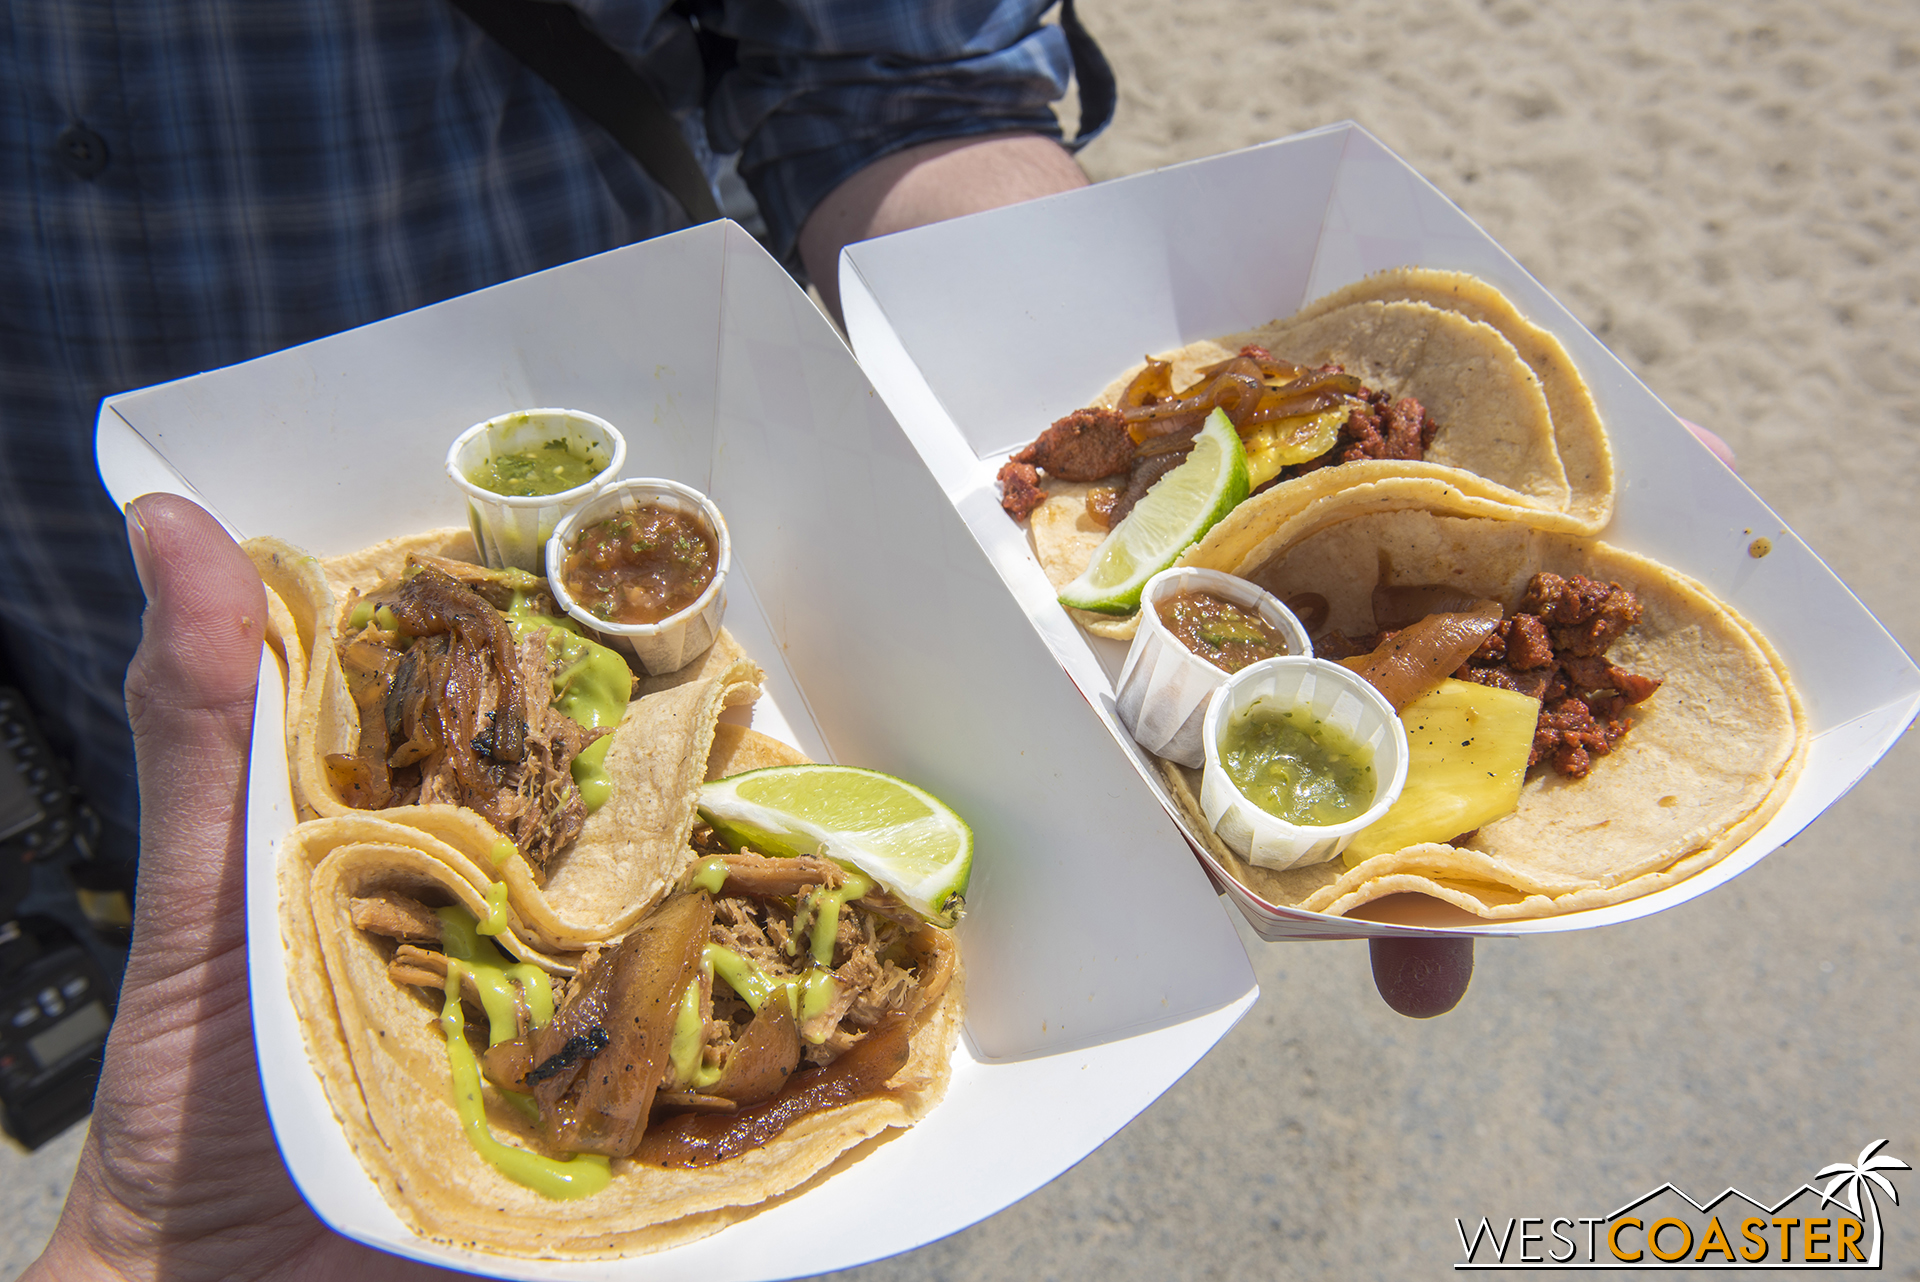  There were still plenty of great tacos to try, though. 